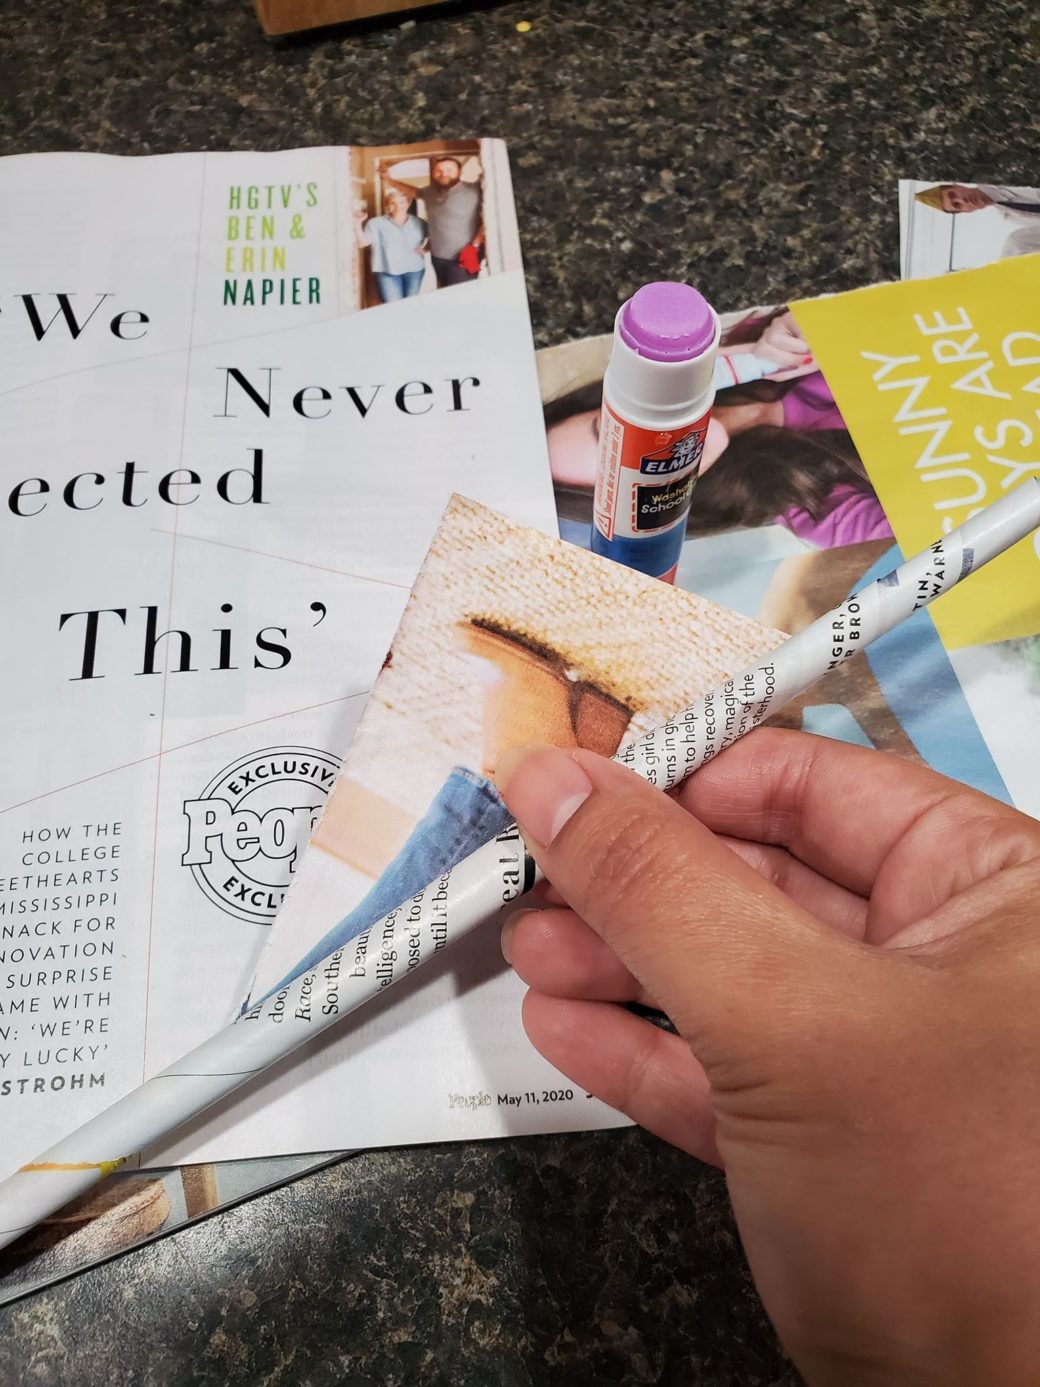 A hand manipulates pages from a magazine for an art project